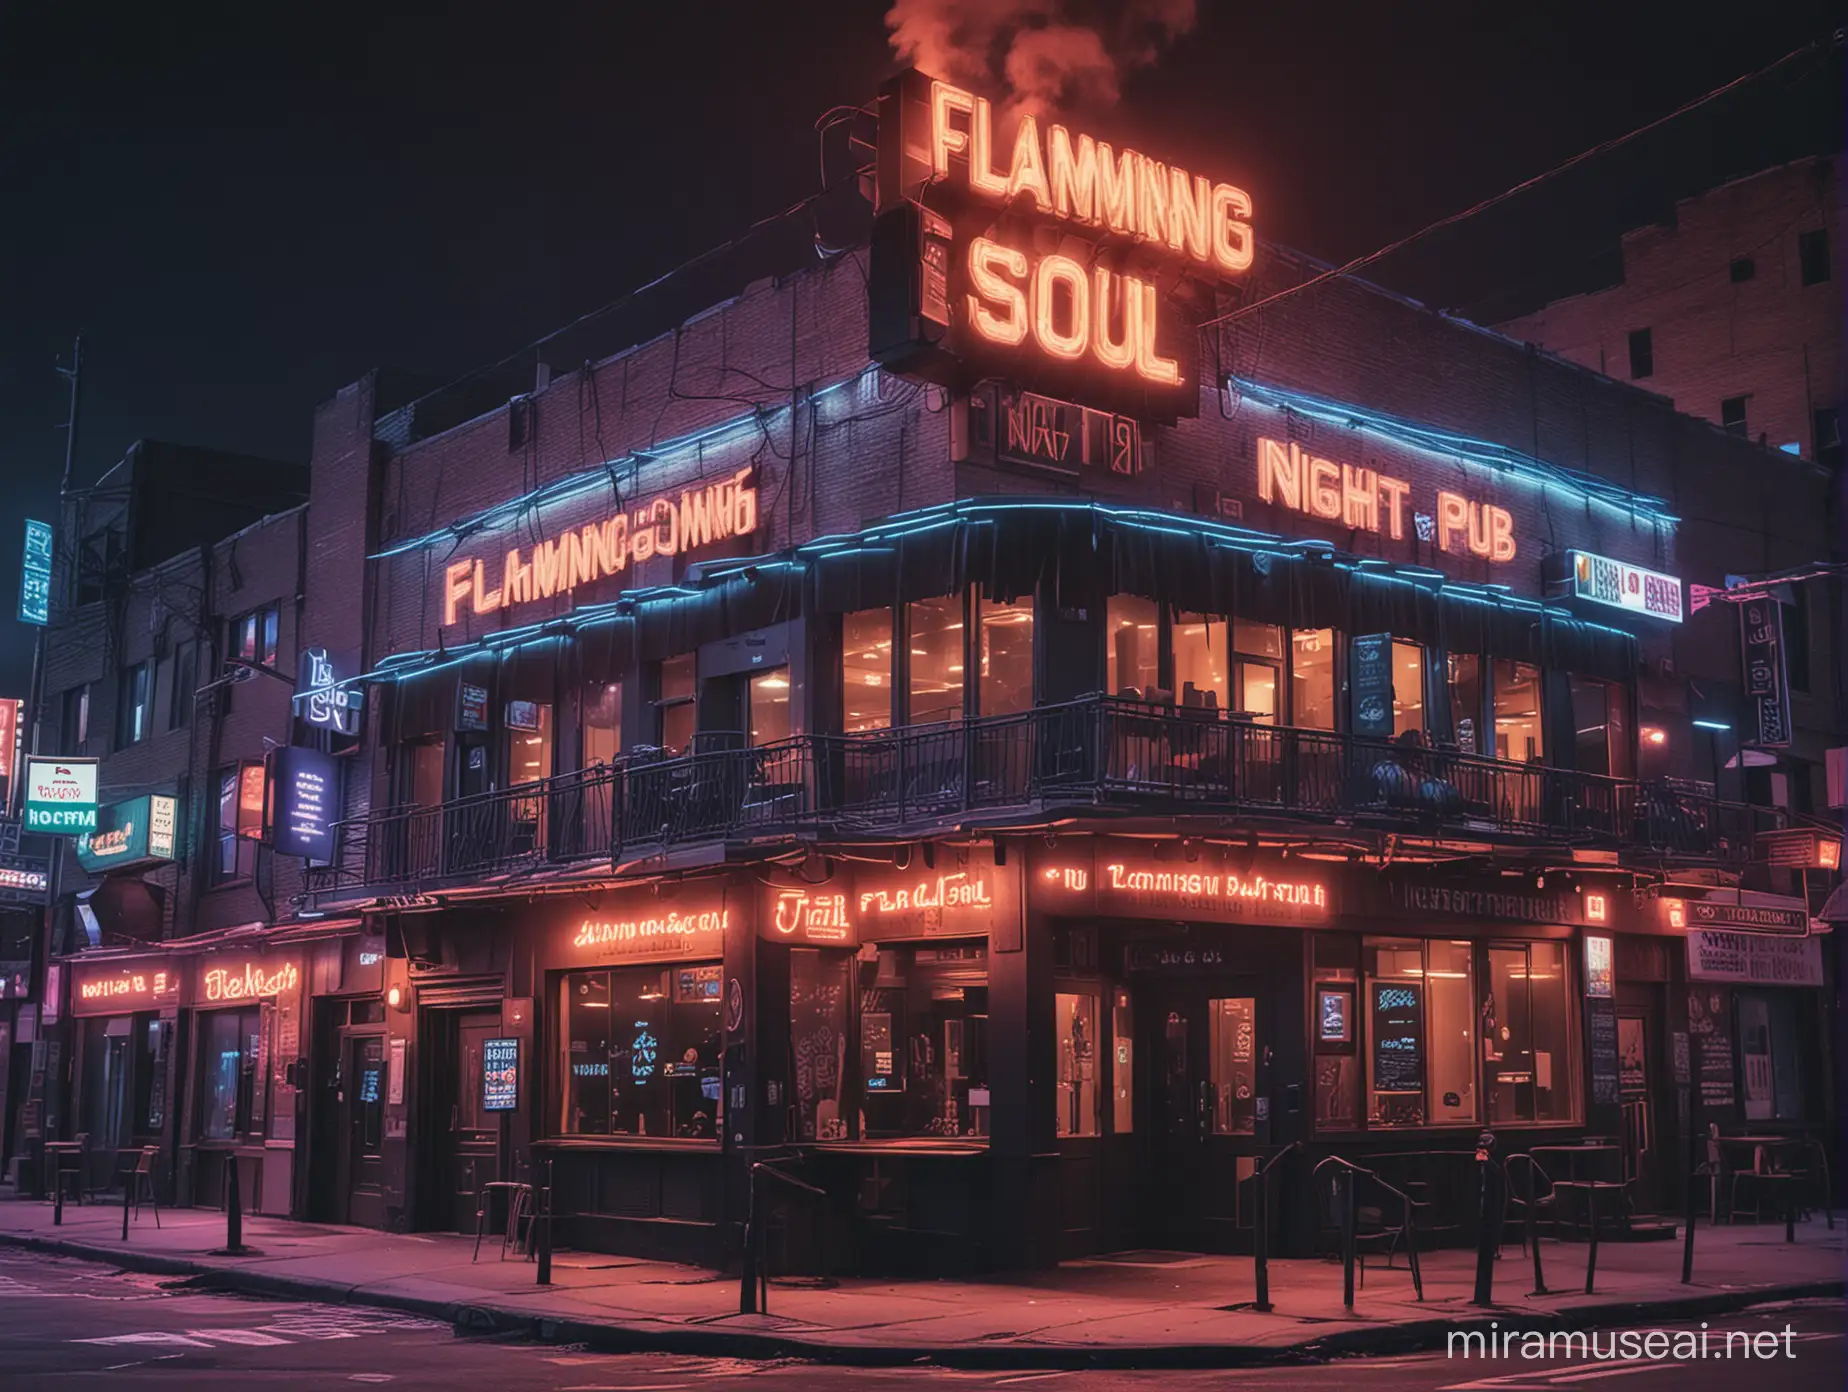 Cyberpunk Nightclub in NY Suburbs with Flaming Soul Signage